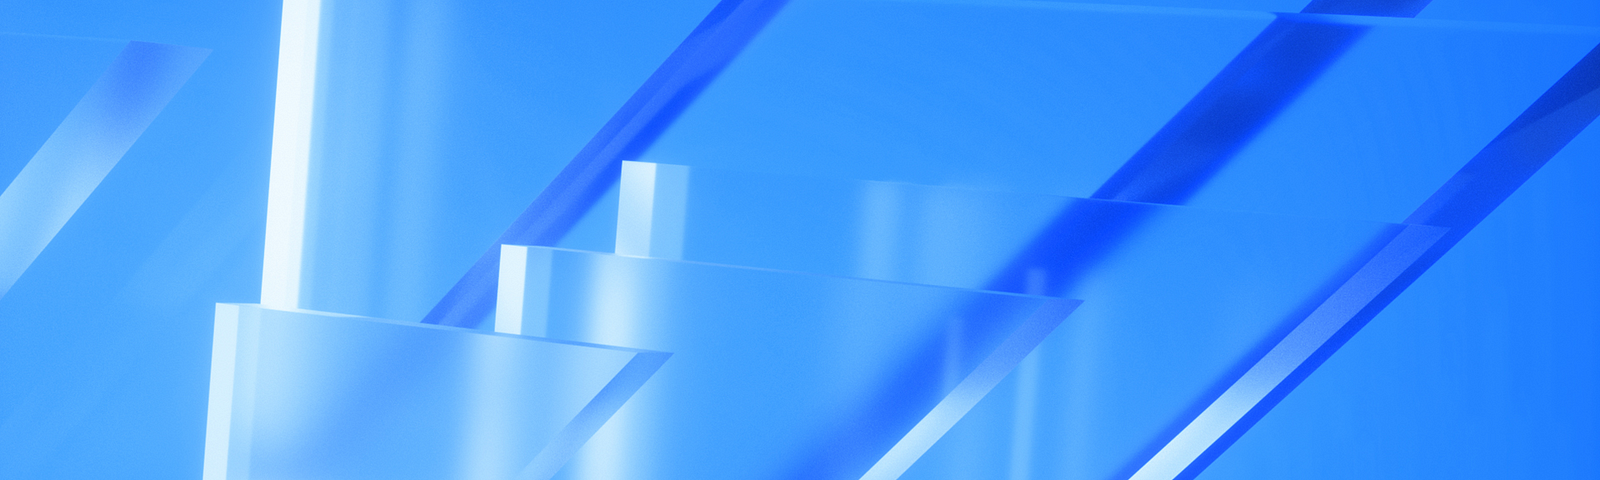 Abstract composition of translucent blue geometric shapes. Various rectangles and parallelograms overlap and intersect, casting subtle shadows and creating a sense of depth. The shapes are set against a gradient blue background that gives the image a cool, glass-like aesthetic.